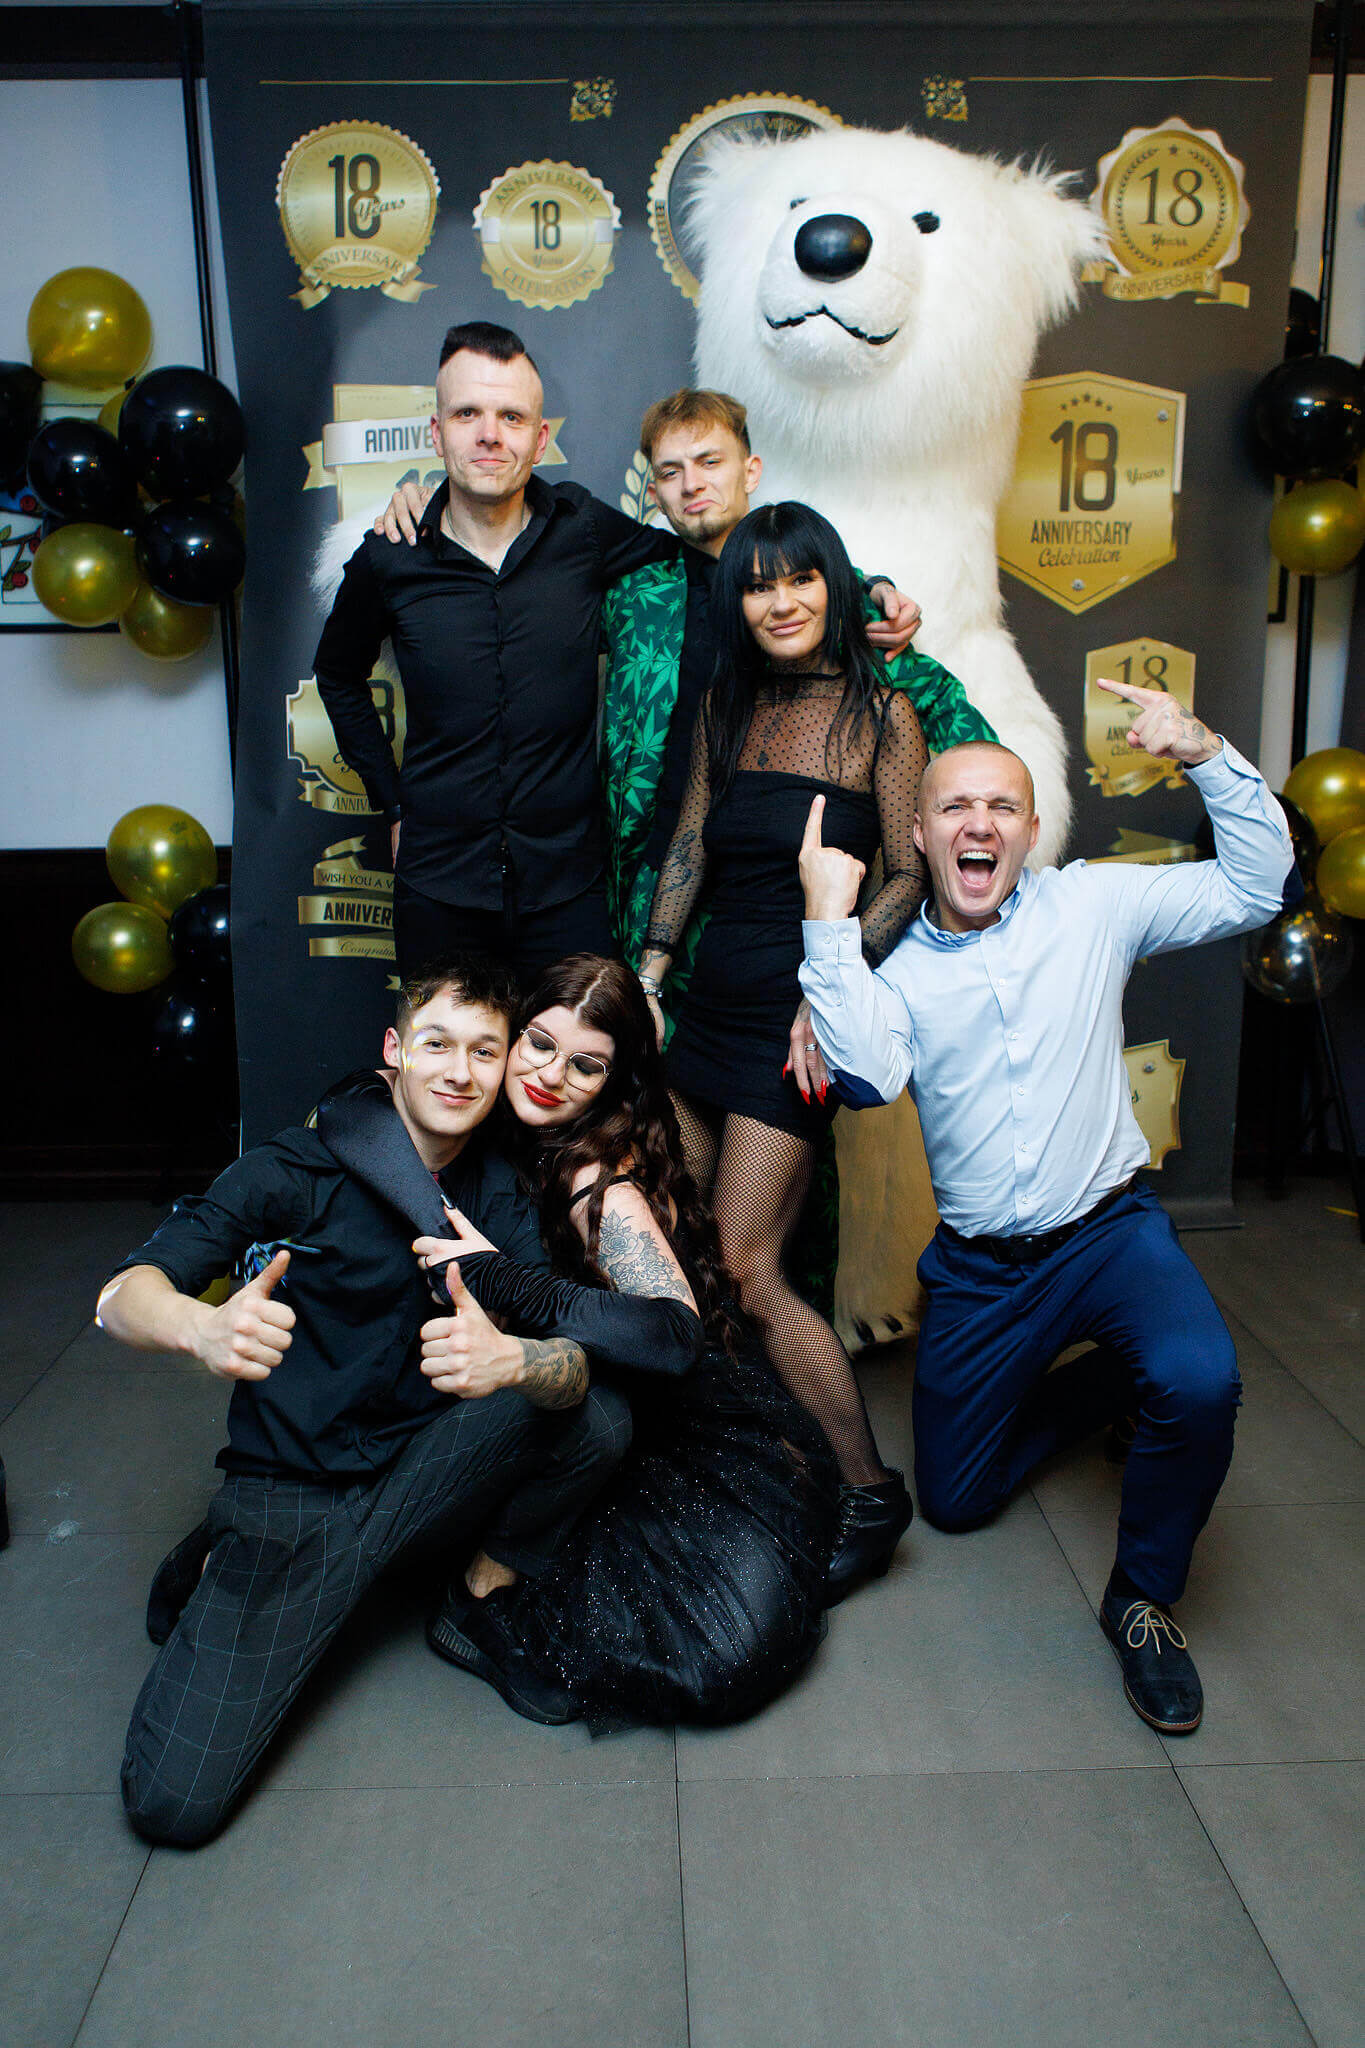 Group of people celebrating with a person in a polar bear costume at an anniversary event with golden balloons and awards-themed backdrop.